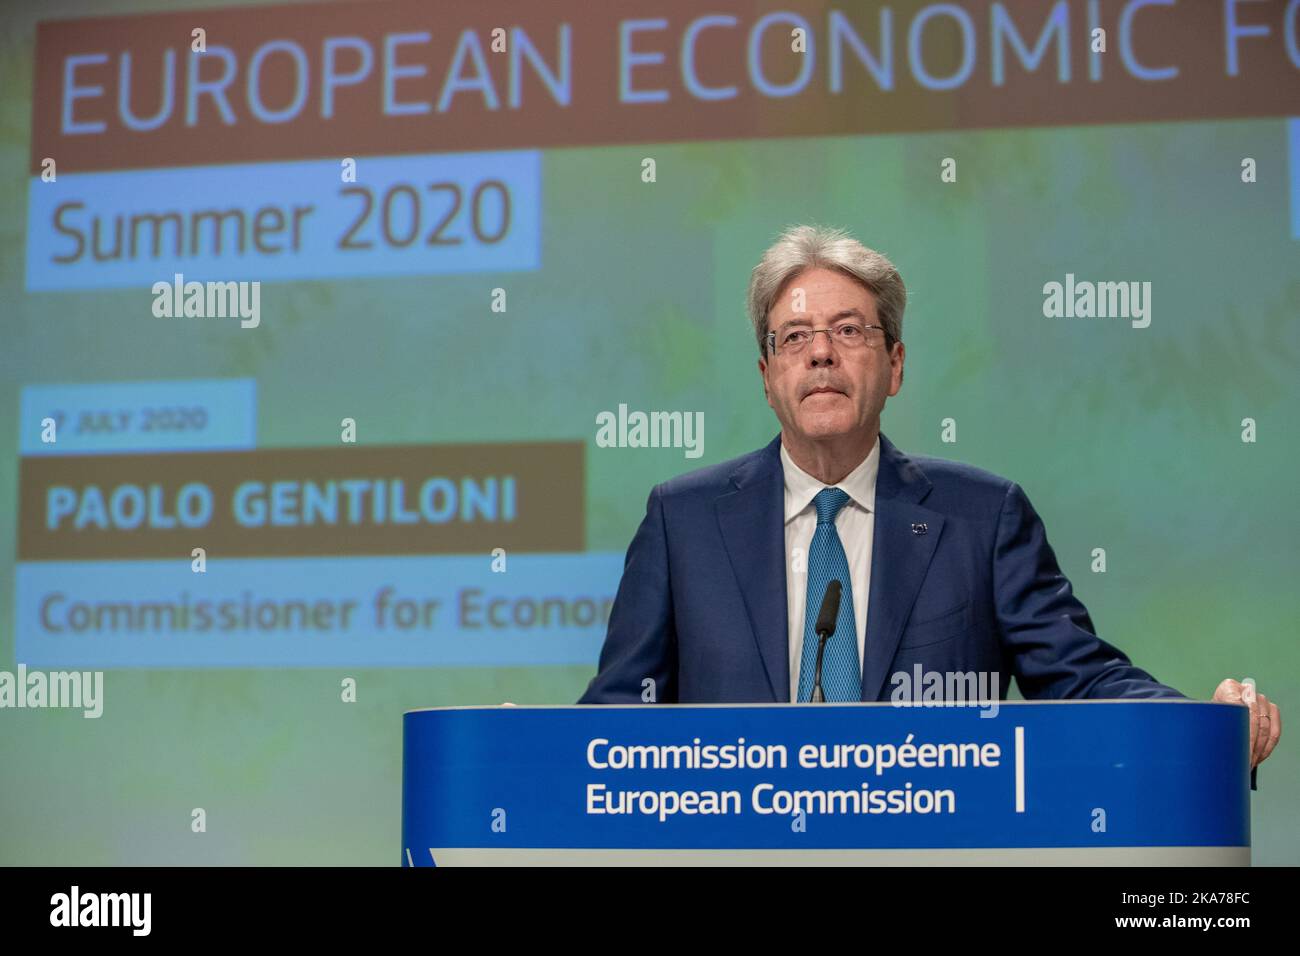 (200707) -- BRUSSELS, July 7, 2020 (Xinhua) -- Paolo Gentiloni, European Commissioner for Economy, attends a press conference on the Summer 2020 Economic Forecast at the European Commission headquarters in Brussels, Belgium, July 7, 2020. The European economy will face a 'deeper recession' than previously predicted due to the prolonged containment measures against COVID-19, the European Commission said in its Summer 2020 Economic Forecast on Tuesday. (European Union/Handout via Xinhua) Stock Photo